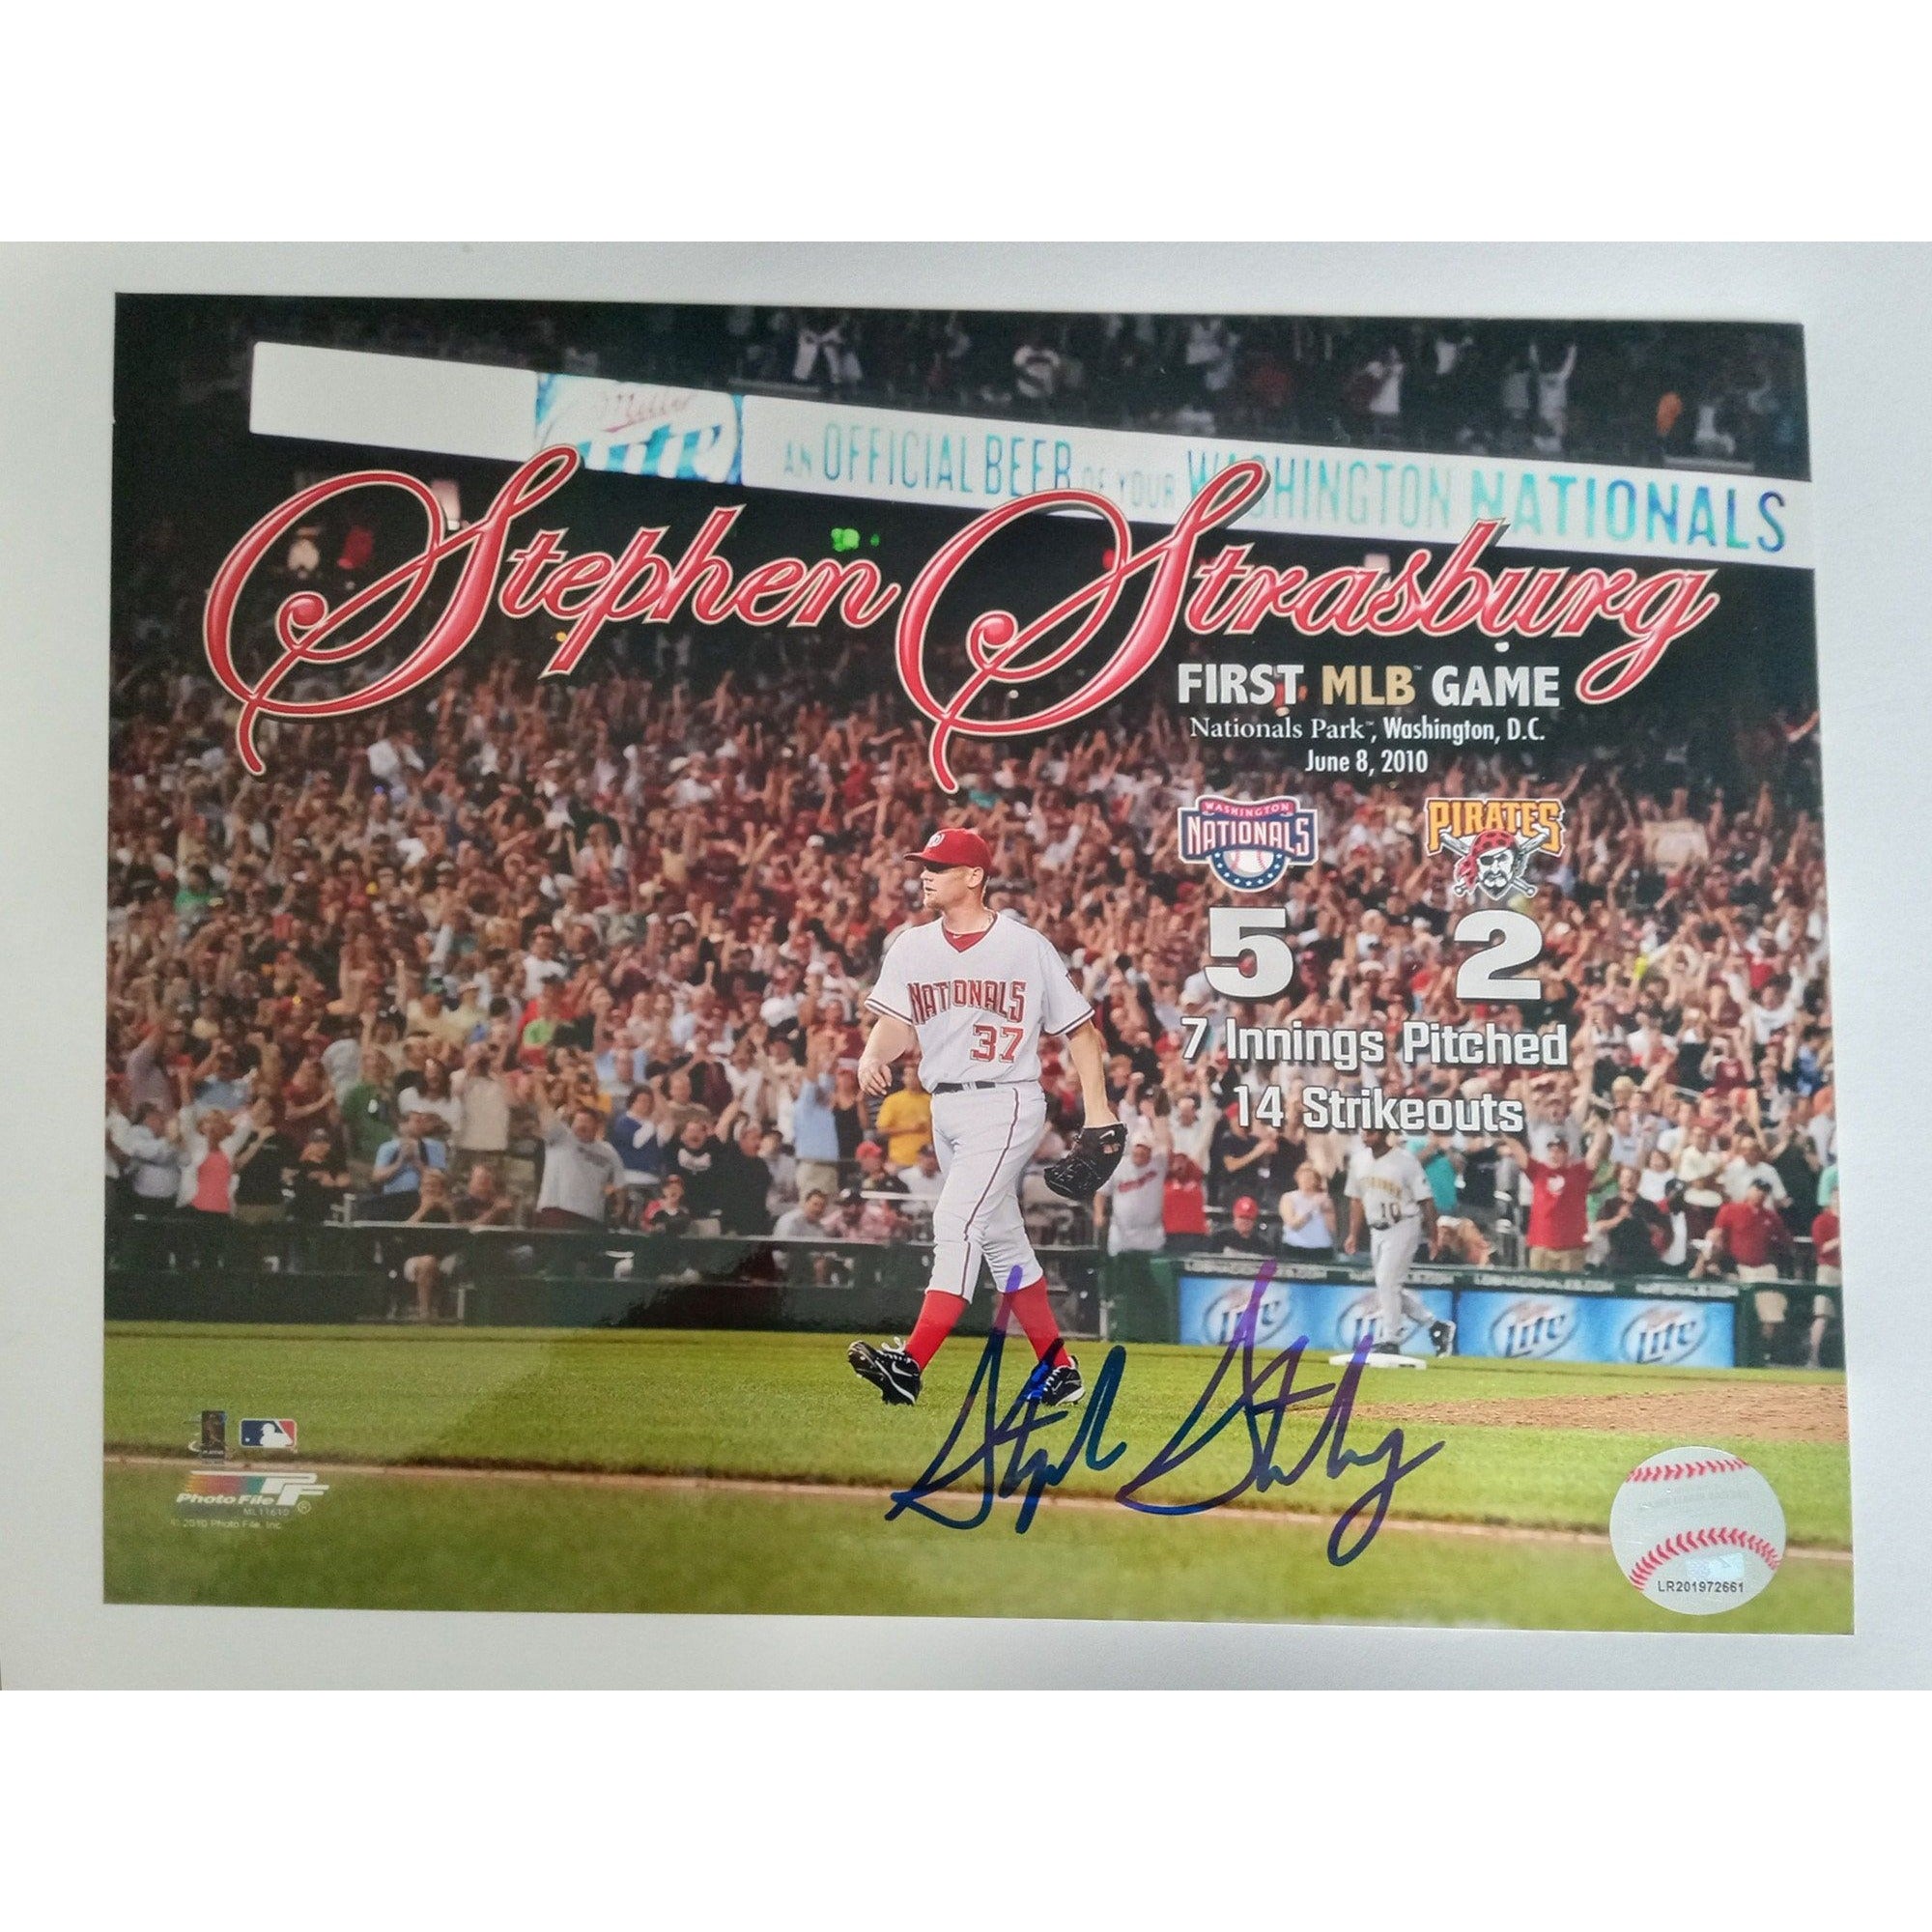 Stephen Strasburg 8 x 10 signed photo with proof